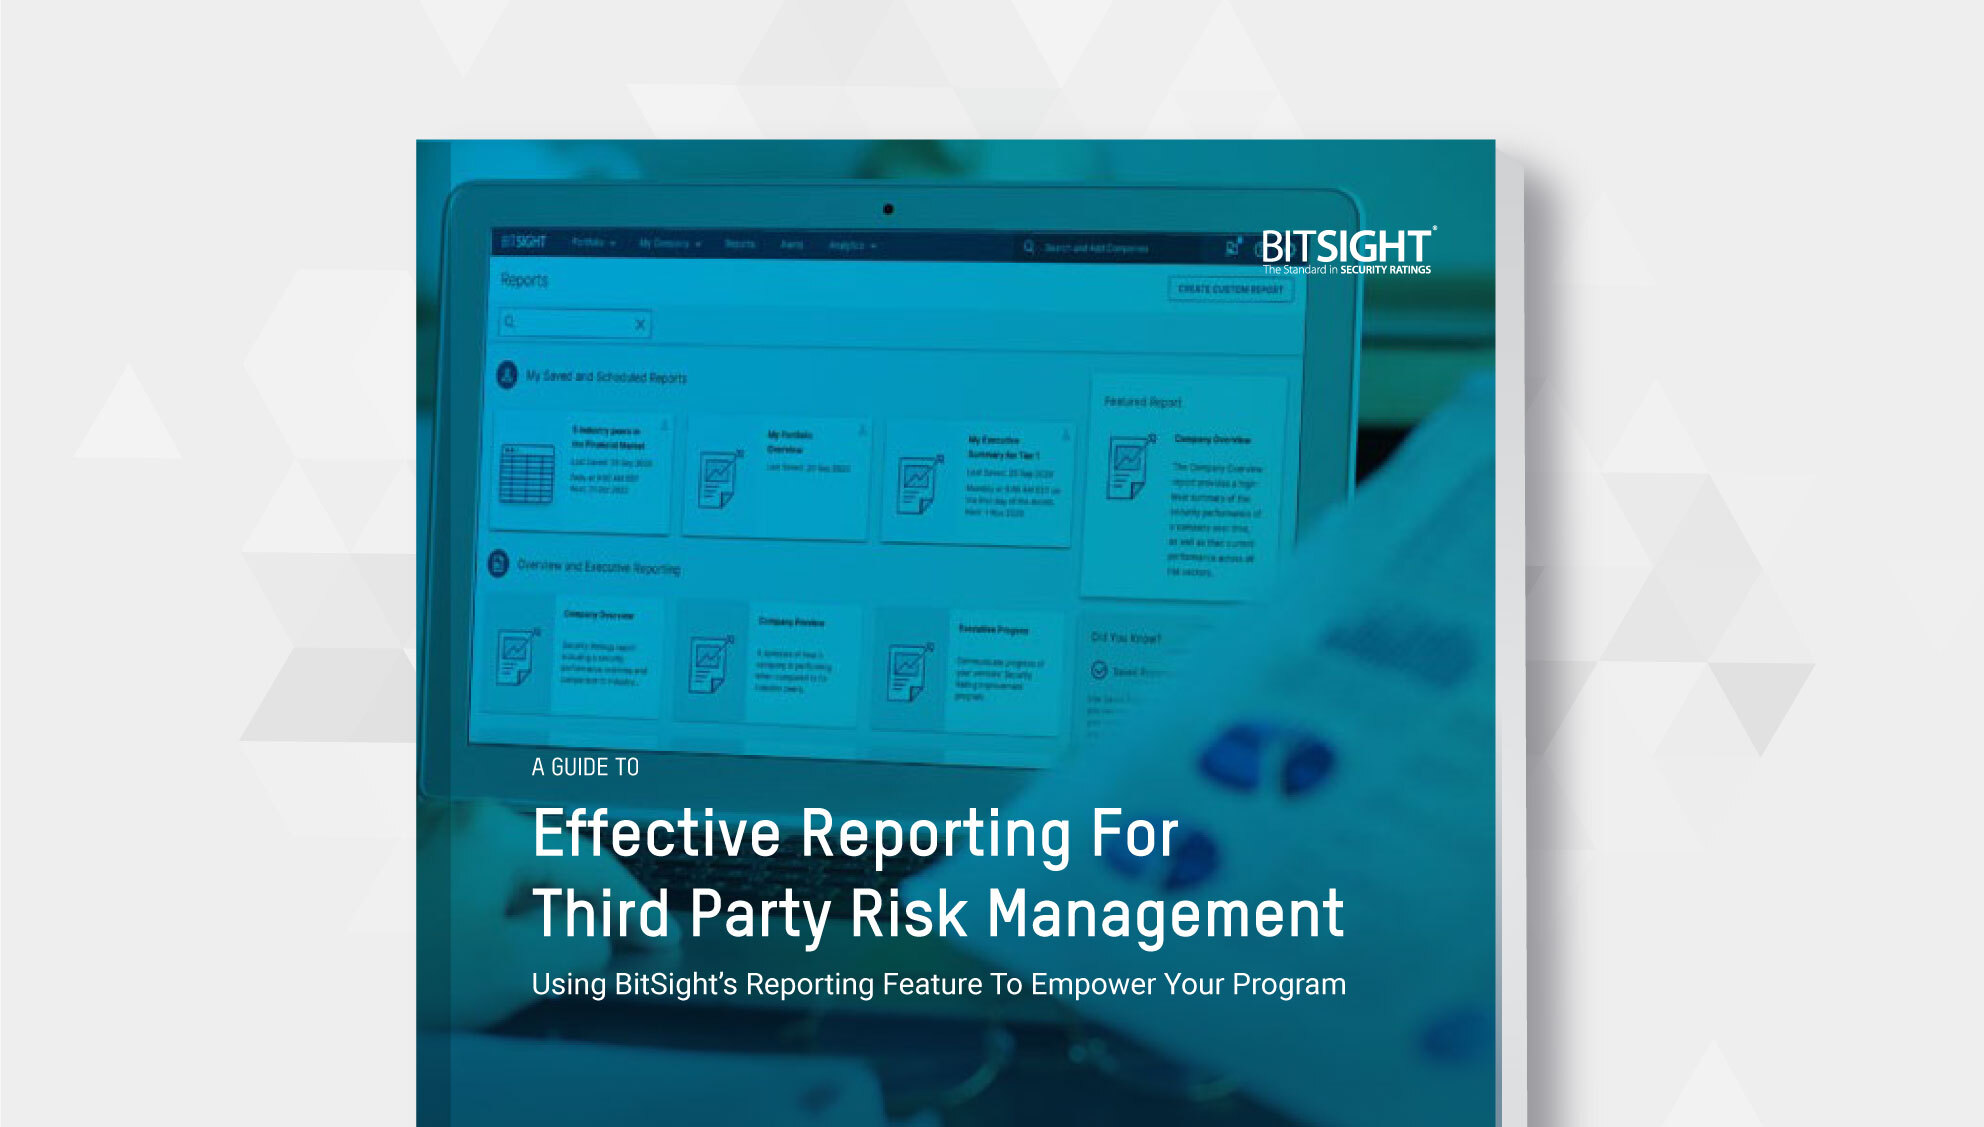 A Guide To Effective Reporting For Third Party Risk Management